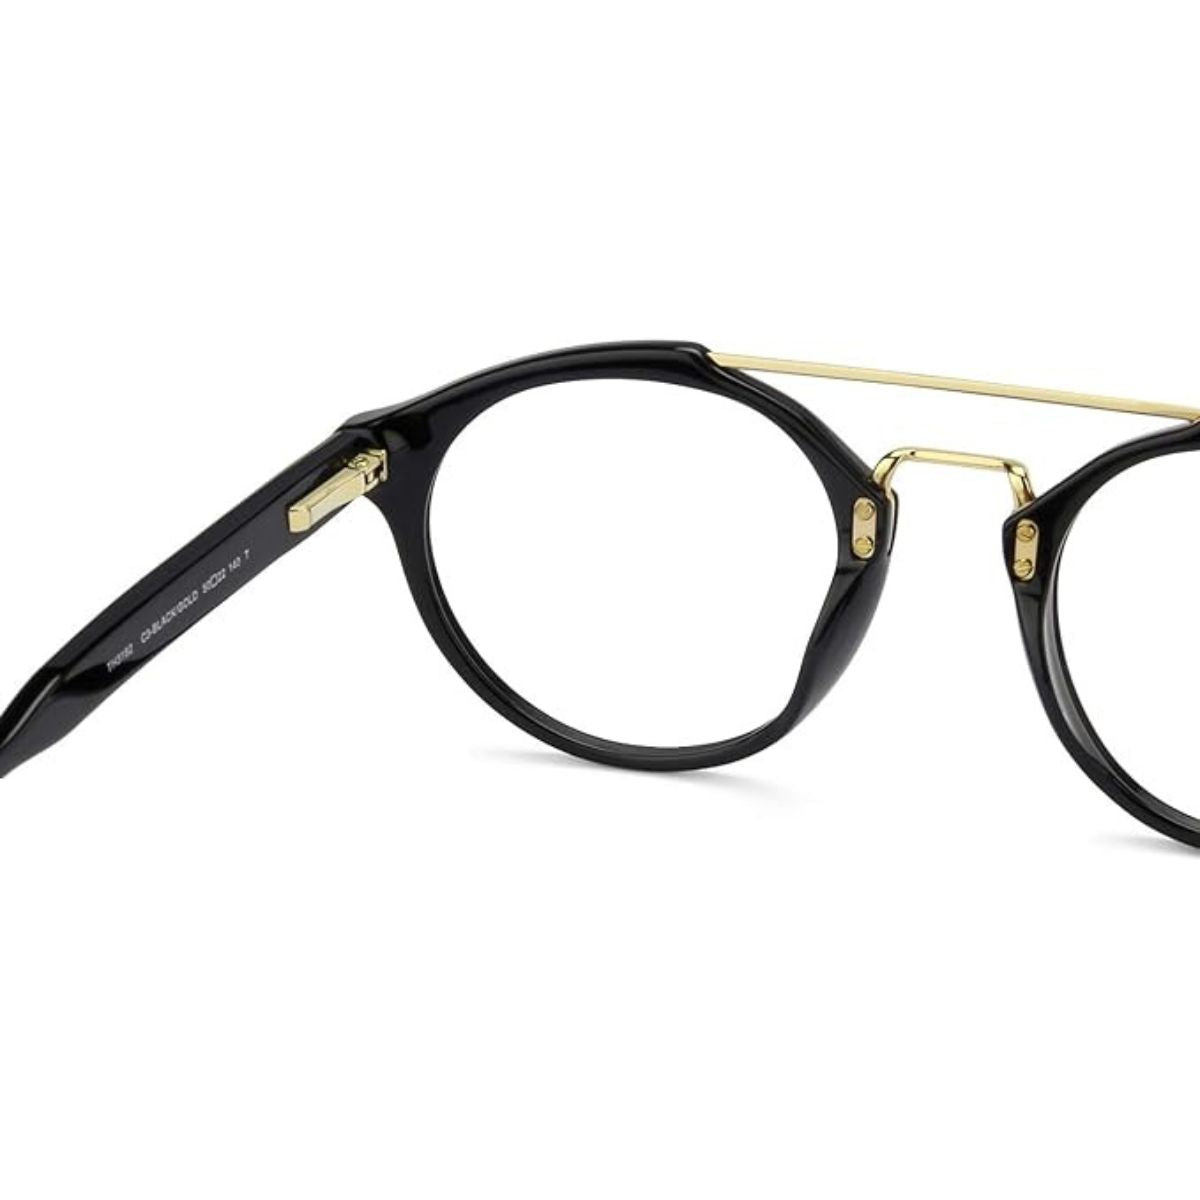 "stylish Tommy Hilfiger 6128 C2 optical frame for women's at optorium"